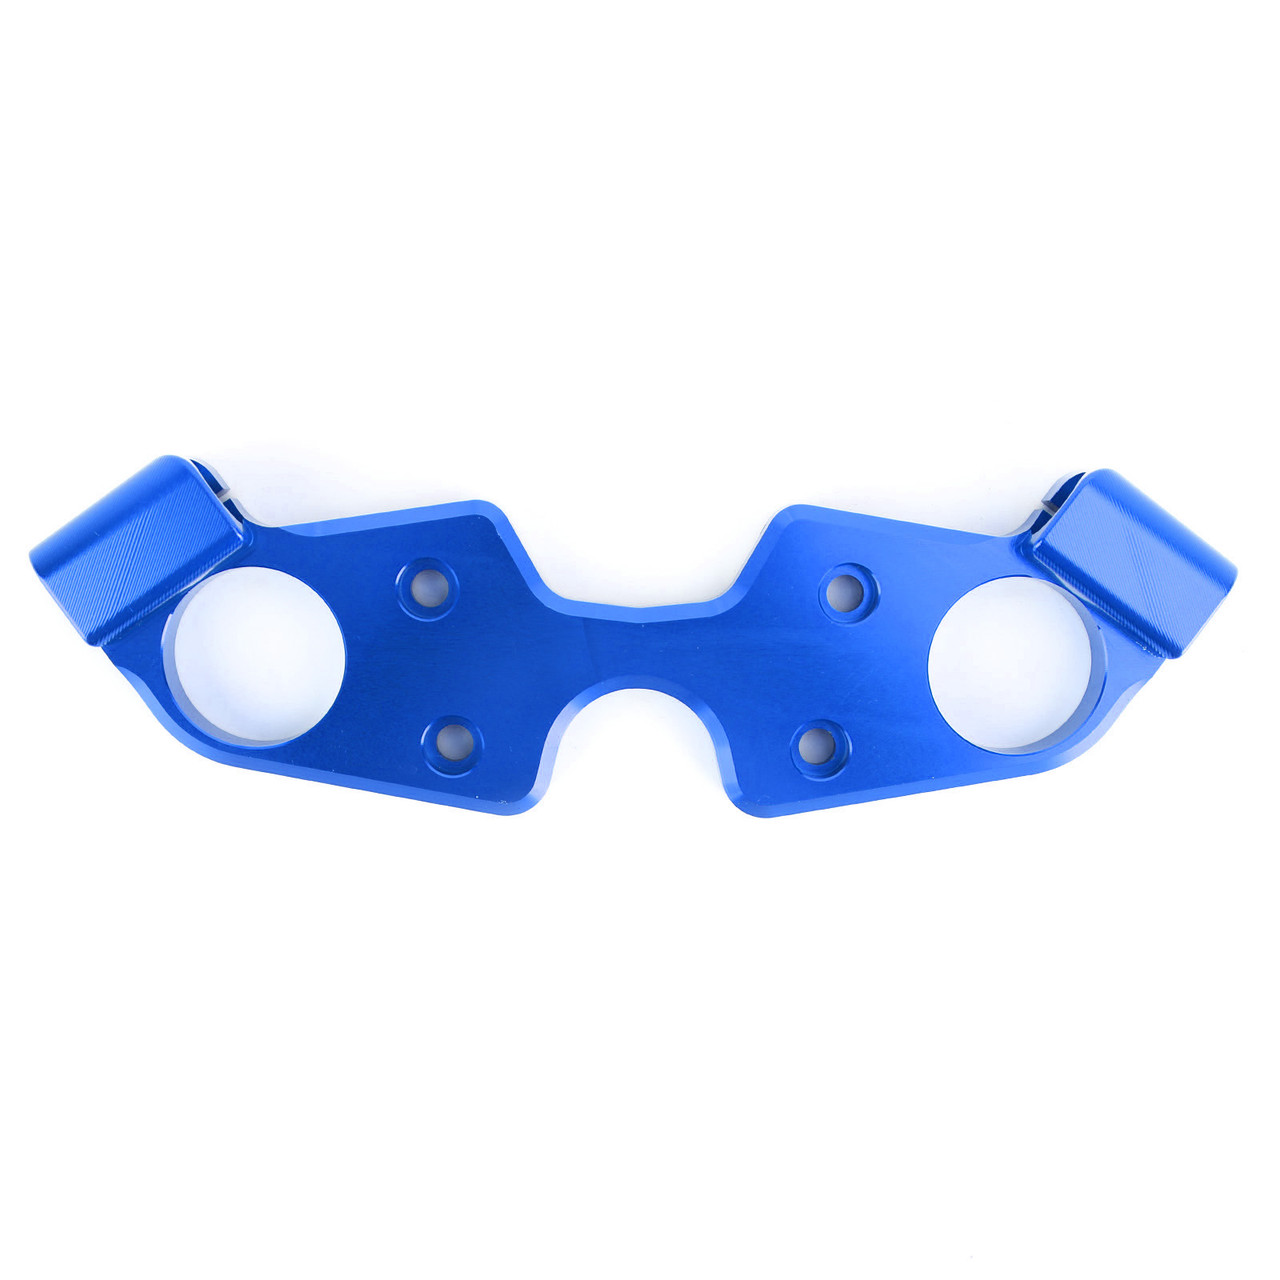 Lowering Triple Tree Front End Upper Top Clamp Fits For Suzuki GSXR 1300 Hayabusa 2008-2020 Blue